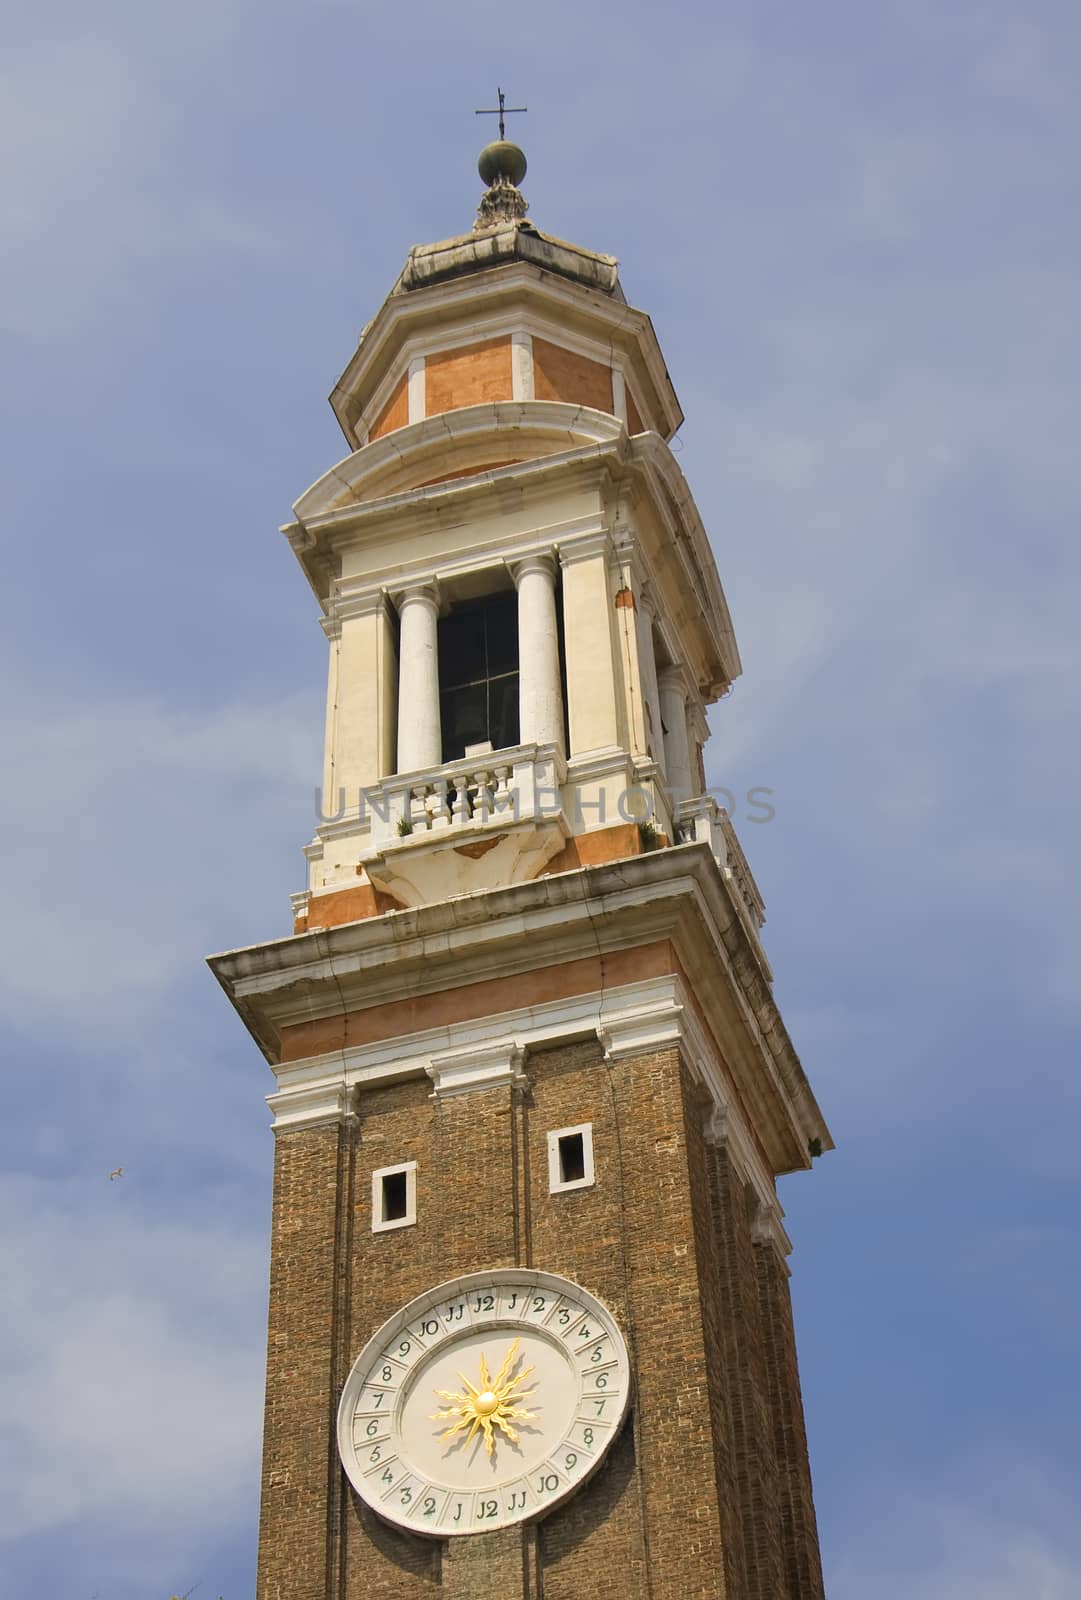 Clock tower with 24hr face in Venice, Italy